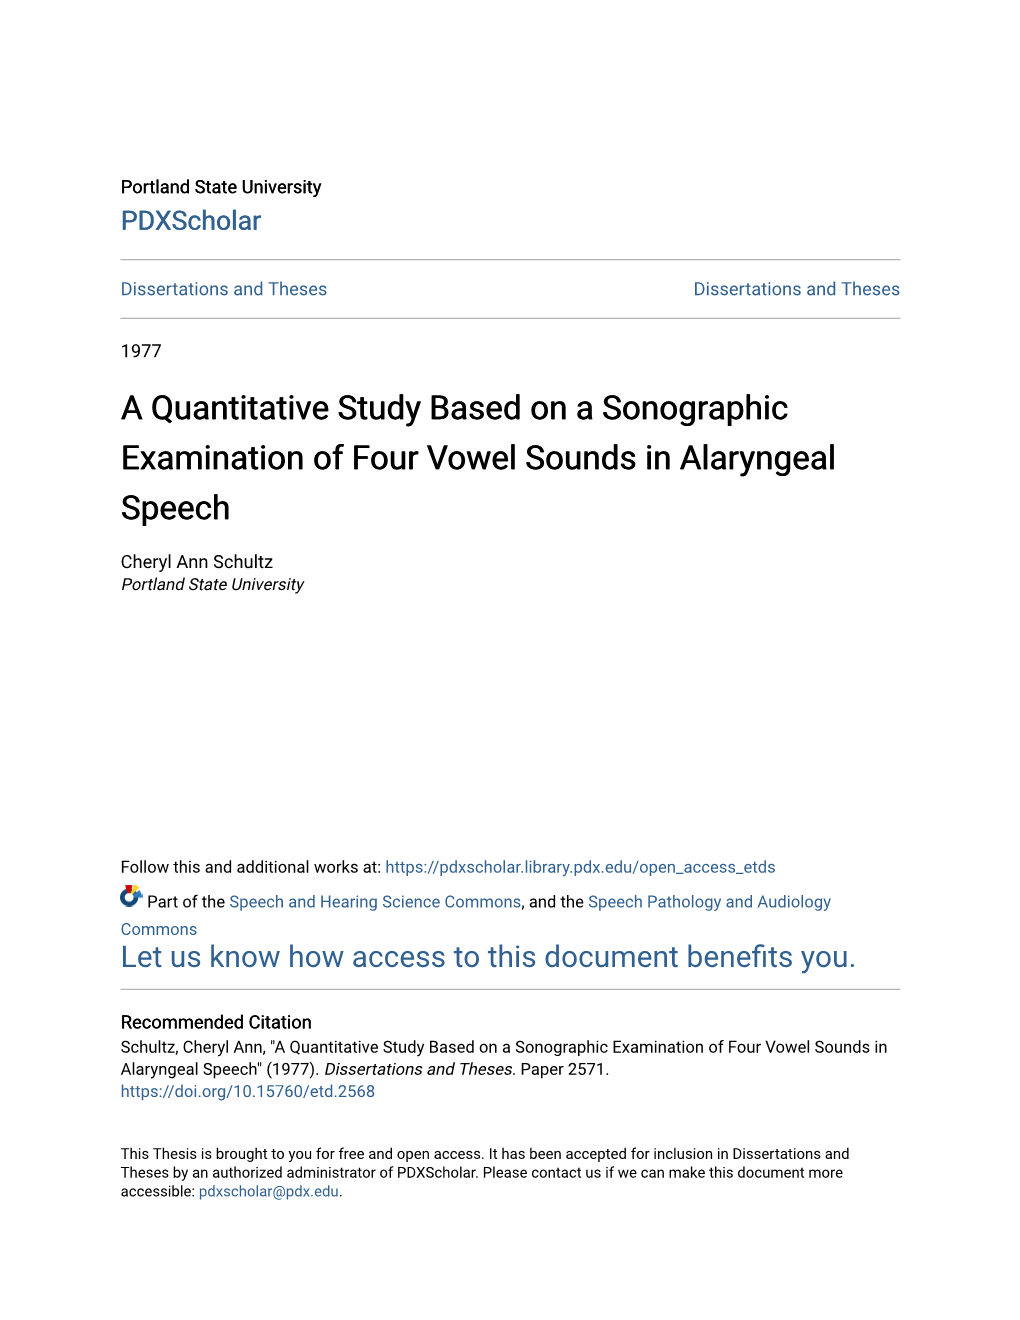 A Quantitative Study Based on a Sonographic Examination of Four Vowel Sounds in Alaryngeal Speech